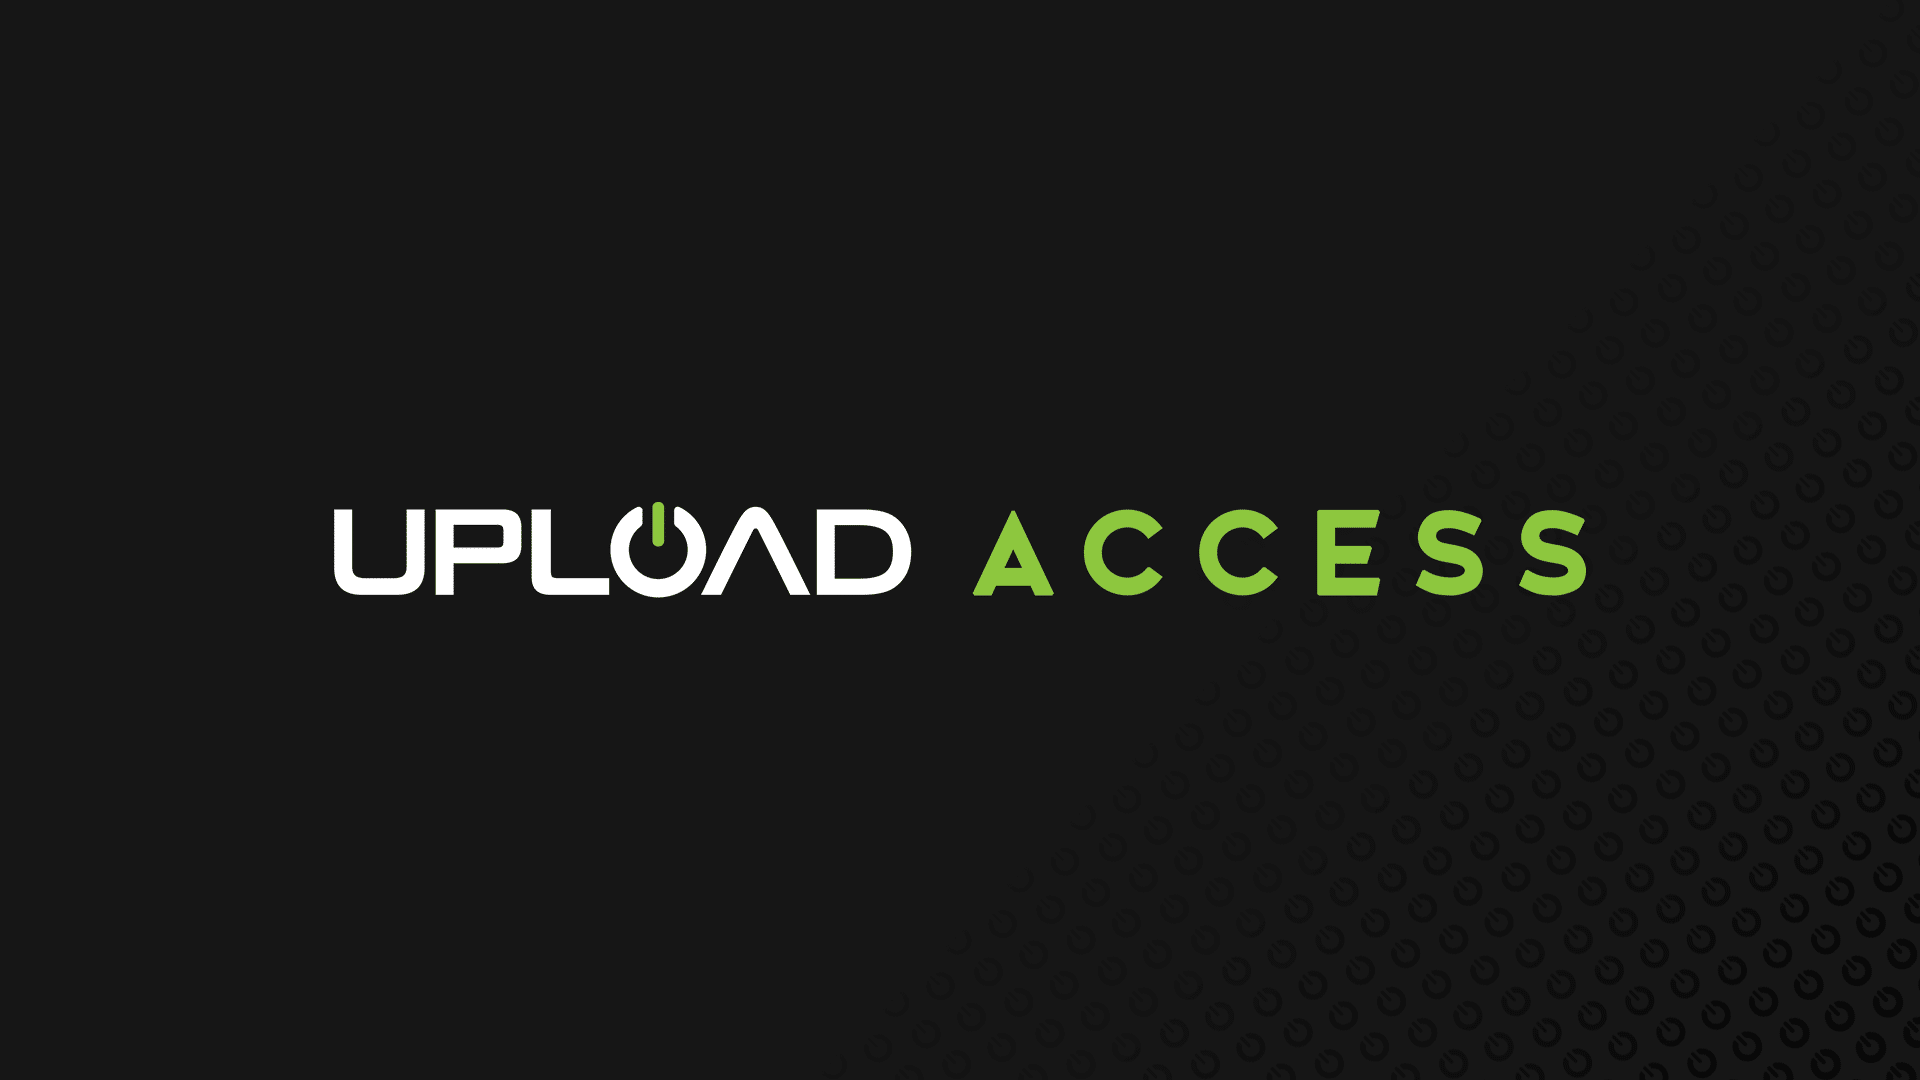 Upload Access Featured Image